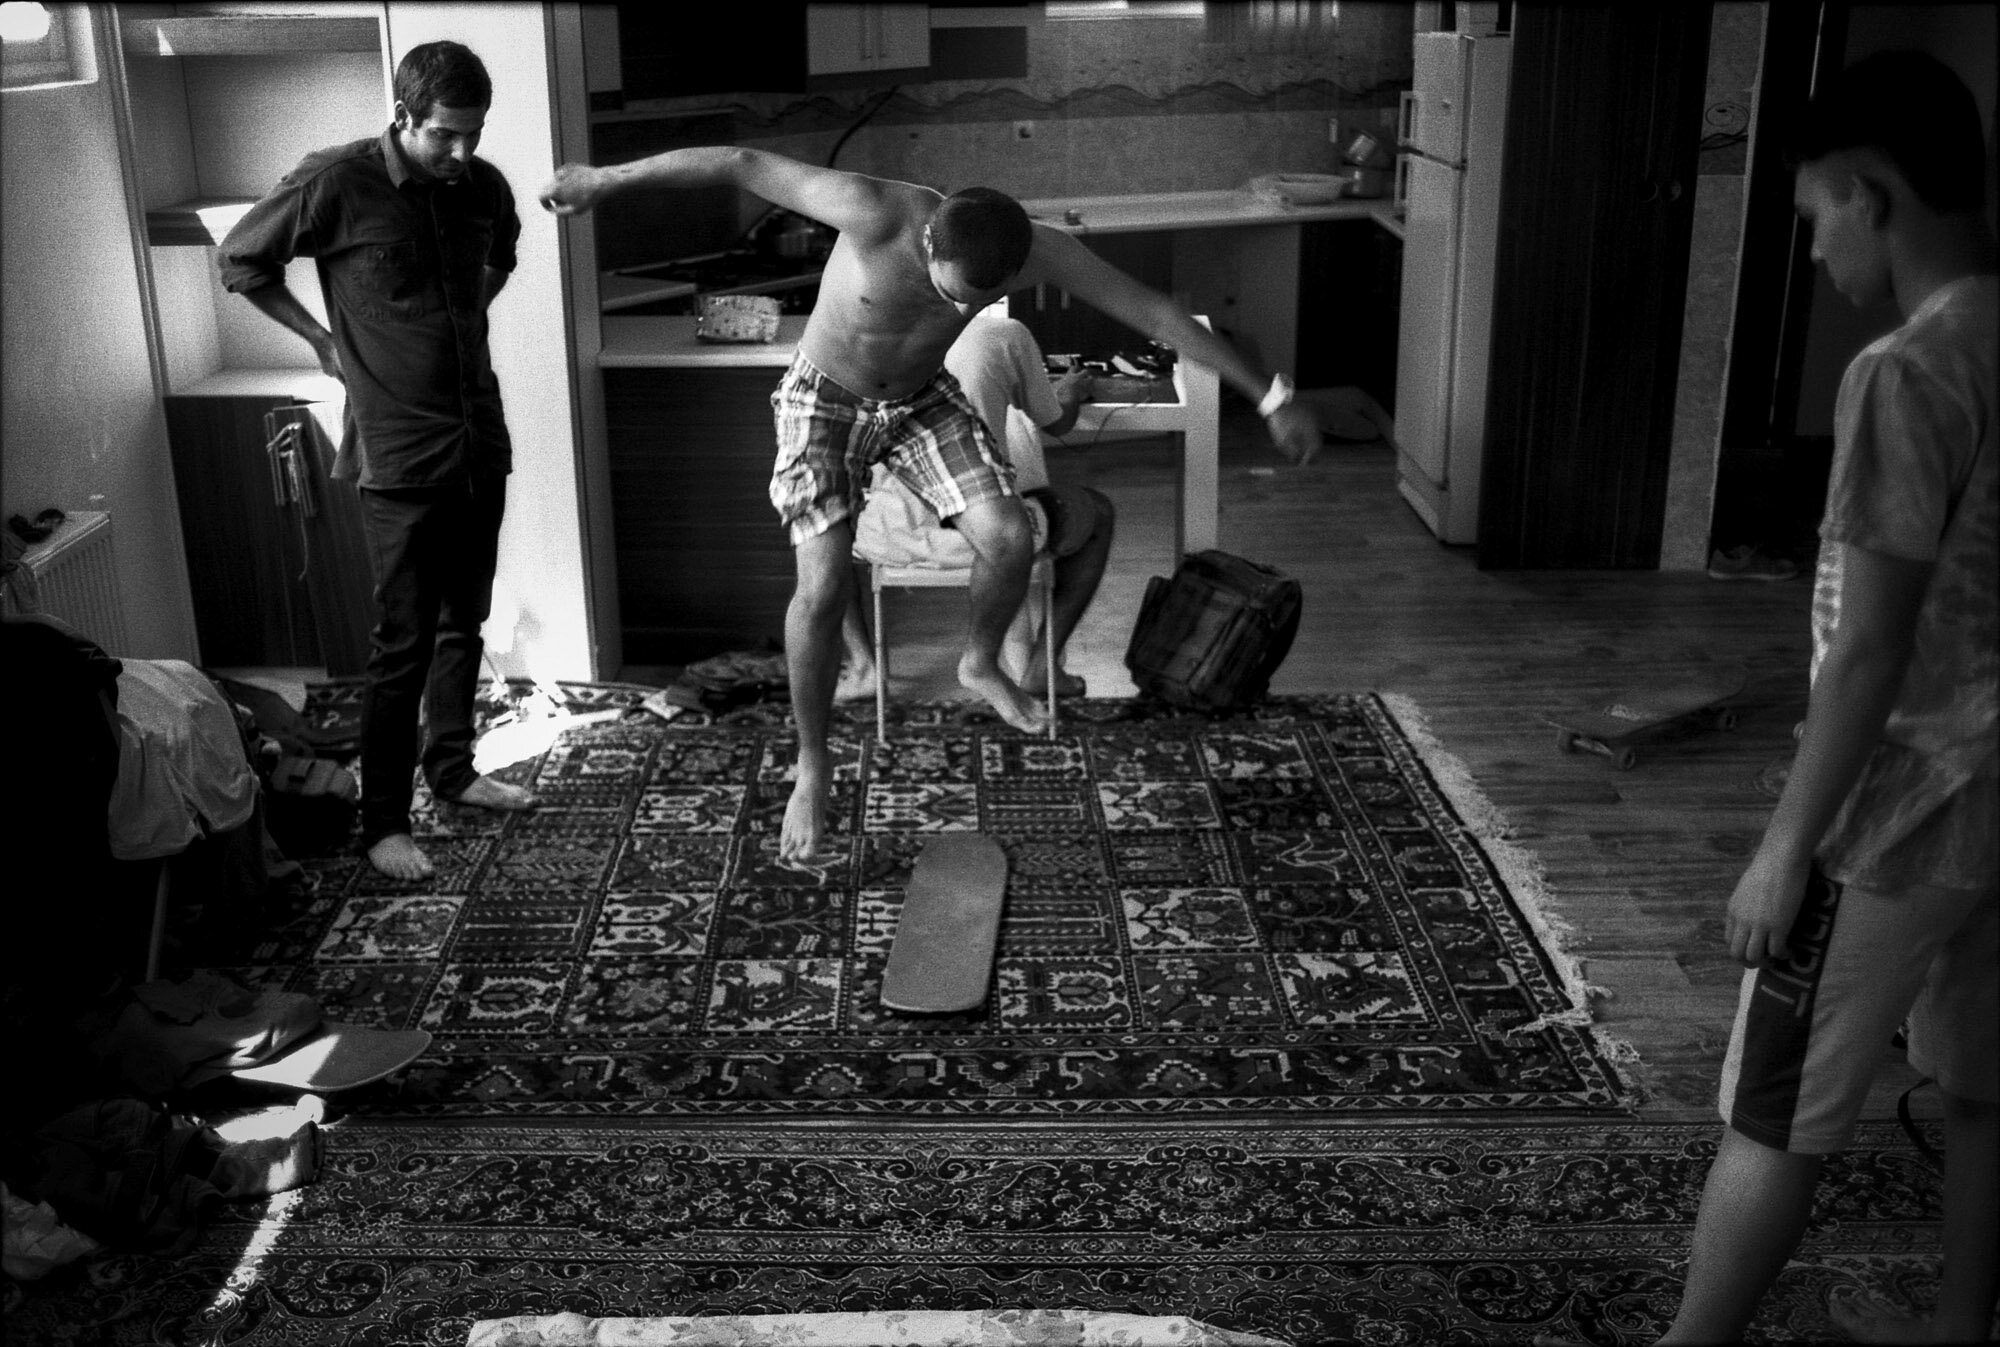  Nima, Mohamad and Arian play with a skateboard without wheels on a persian rug in an apartment in Isfahan, Iran, on September 29, 2015. 